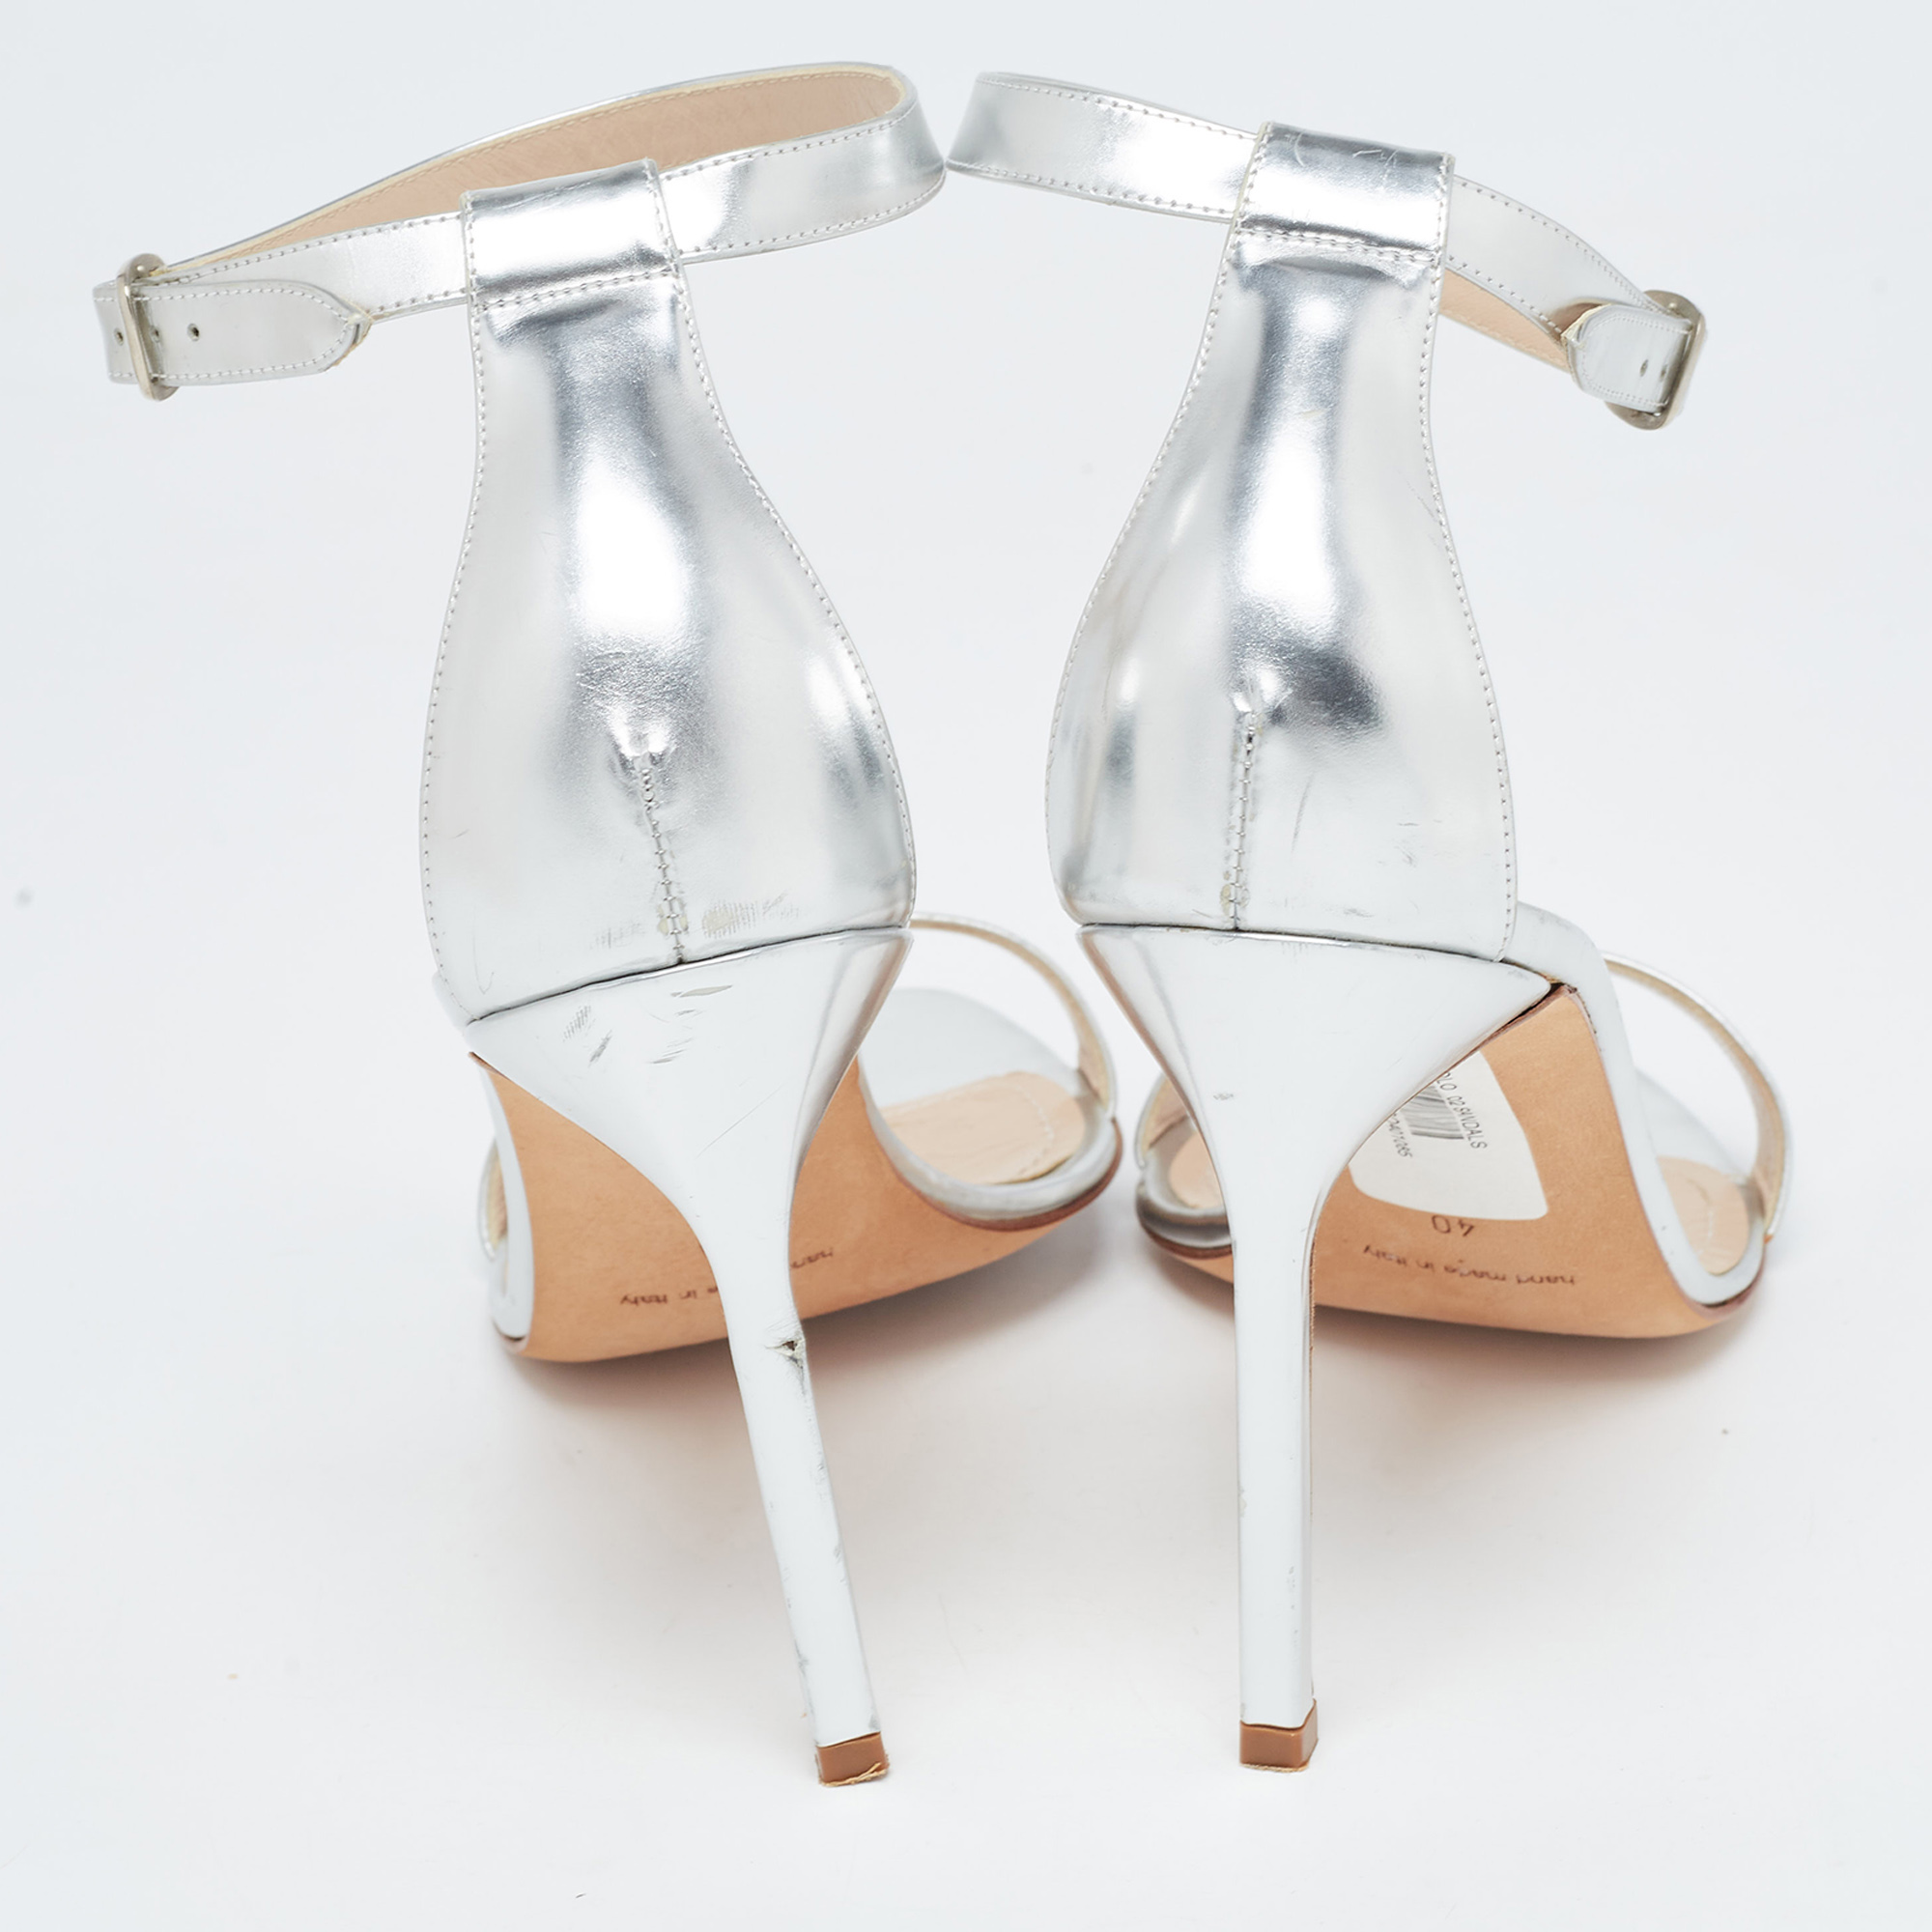 Manolo Blahnik Silver Leather Chaos Ankle Strap Sandals Size 40